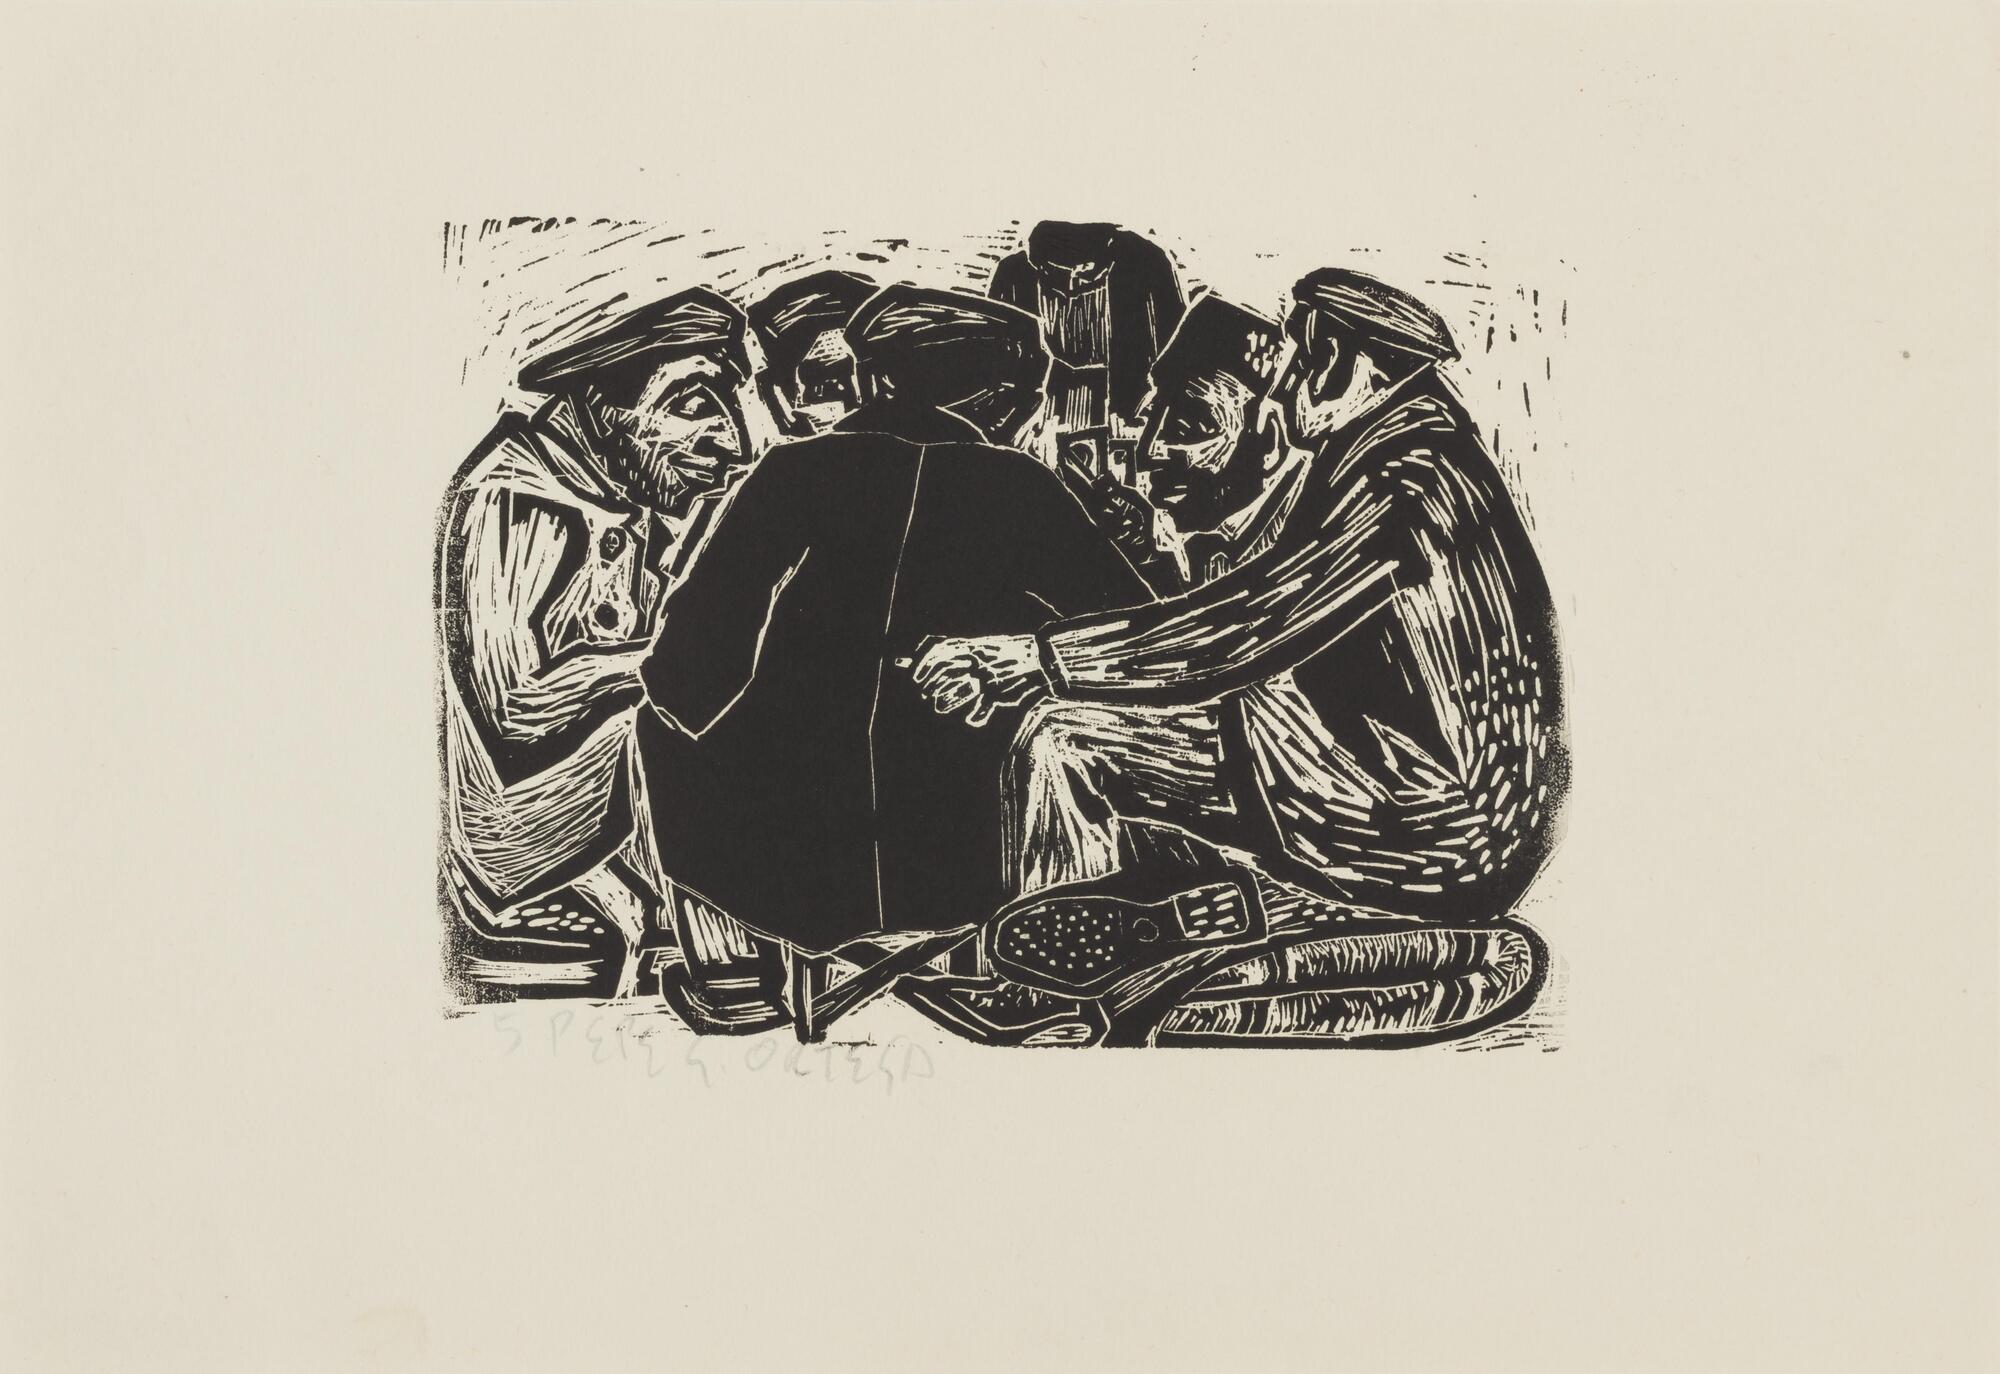 The woodblock print depicts a circle of men sitting on the ground in a huddle, filling the paper. Six figures are visible, primarily only by their heads. One figure's back is to the viewer. The print is signed (l.c.) "5 Pepe Ortega" in pencil.